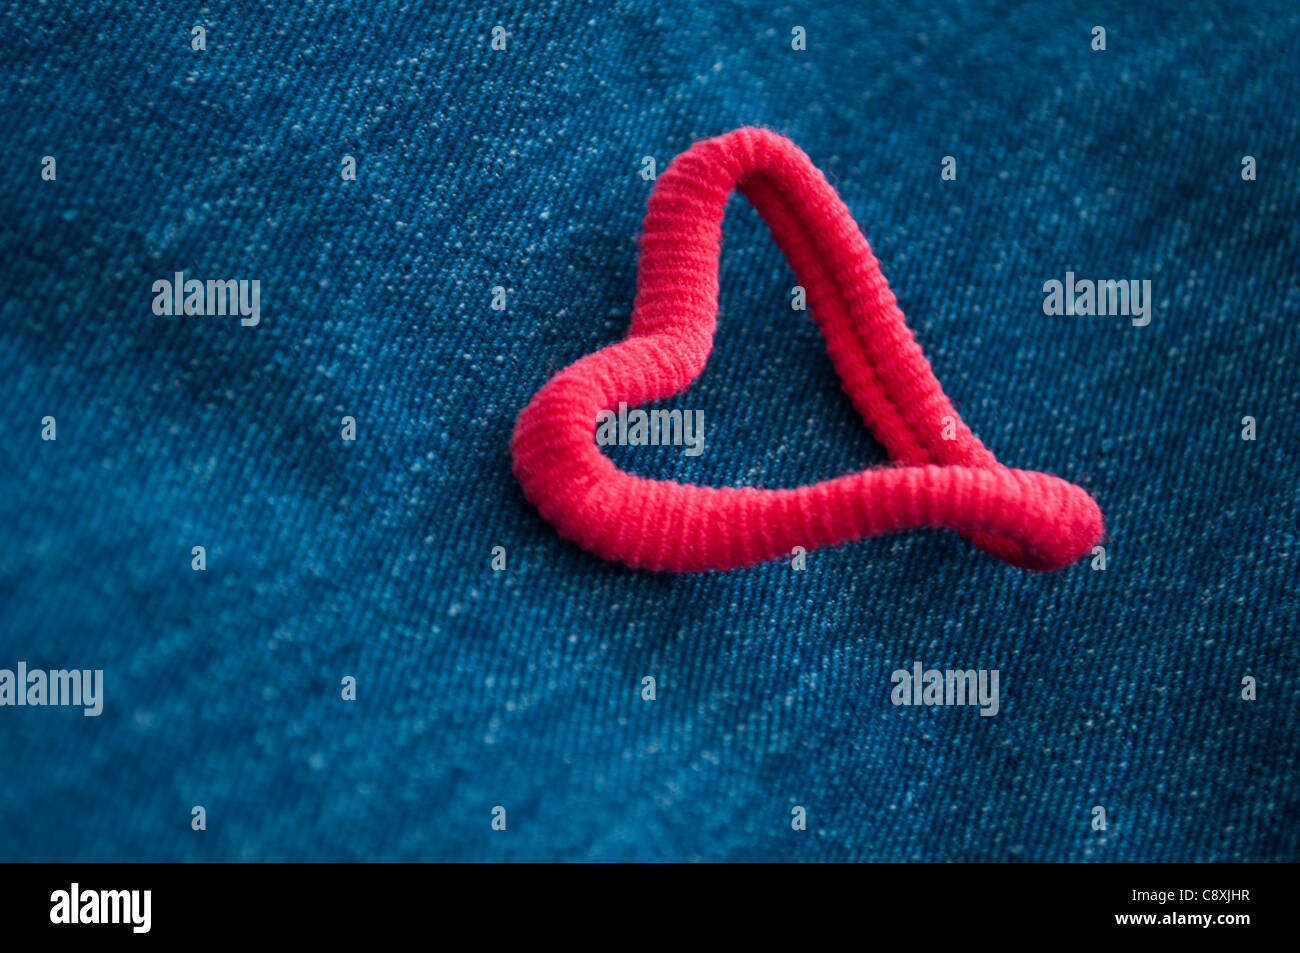 Hair elastic heart and blue jeans Stock Photo